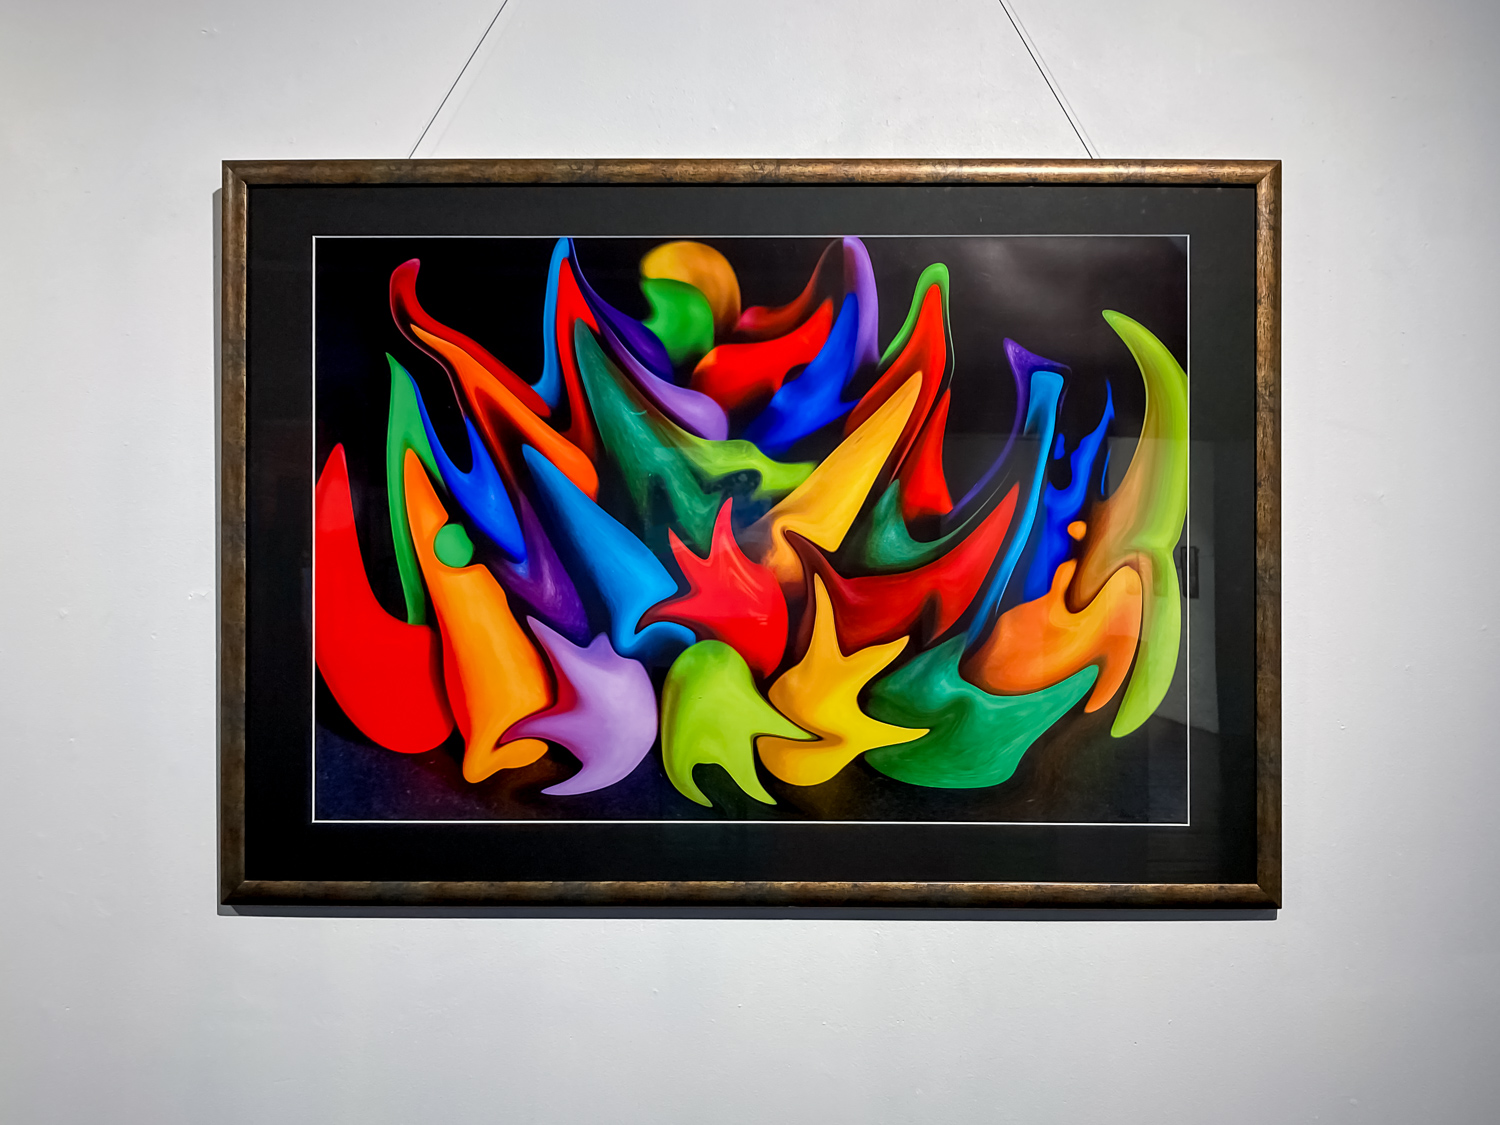 A photograph of bright colour splashes on a black background, hanging on a white wall